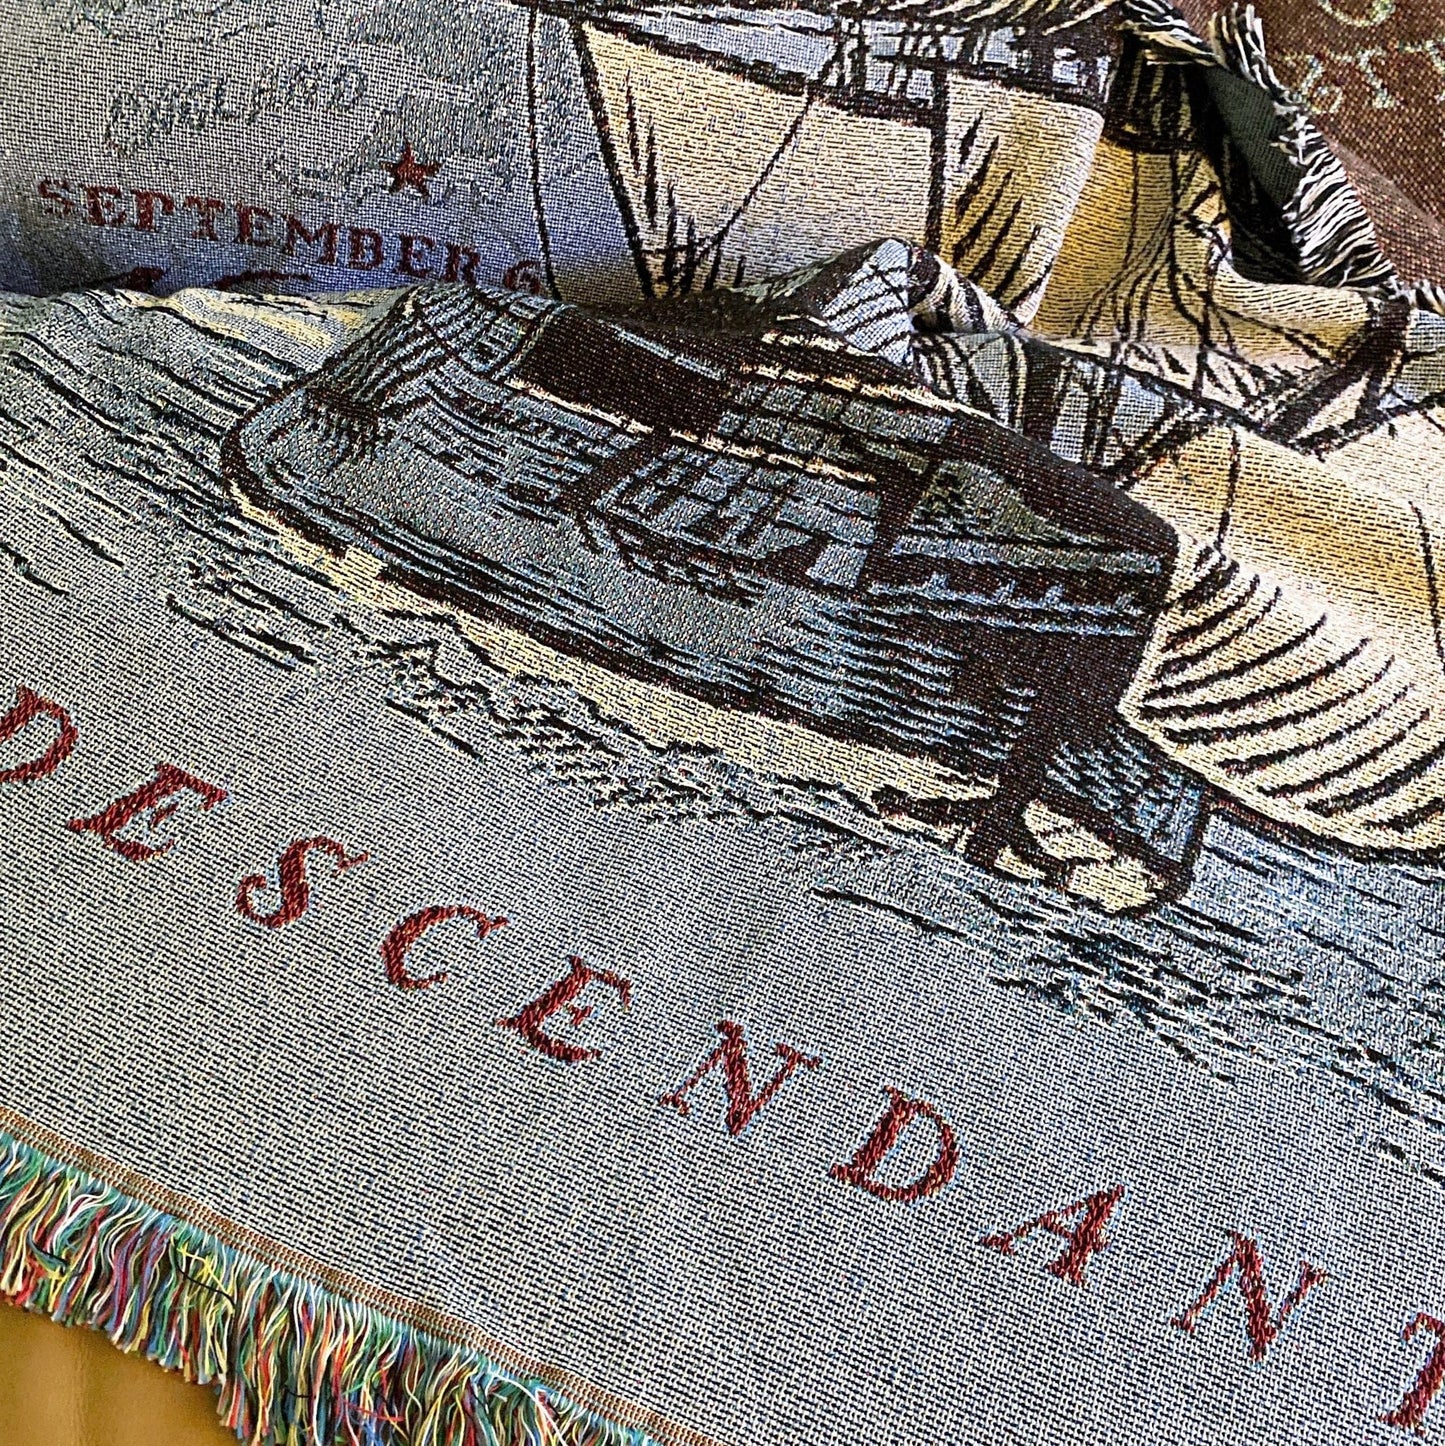 Close-up "Voyage of the Mayflower" Blanket woven from the History List Store - Made in the USA